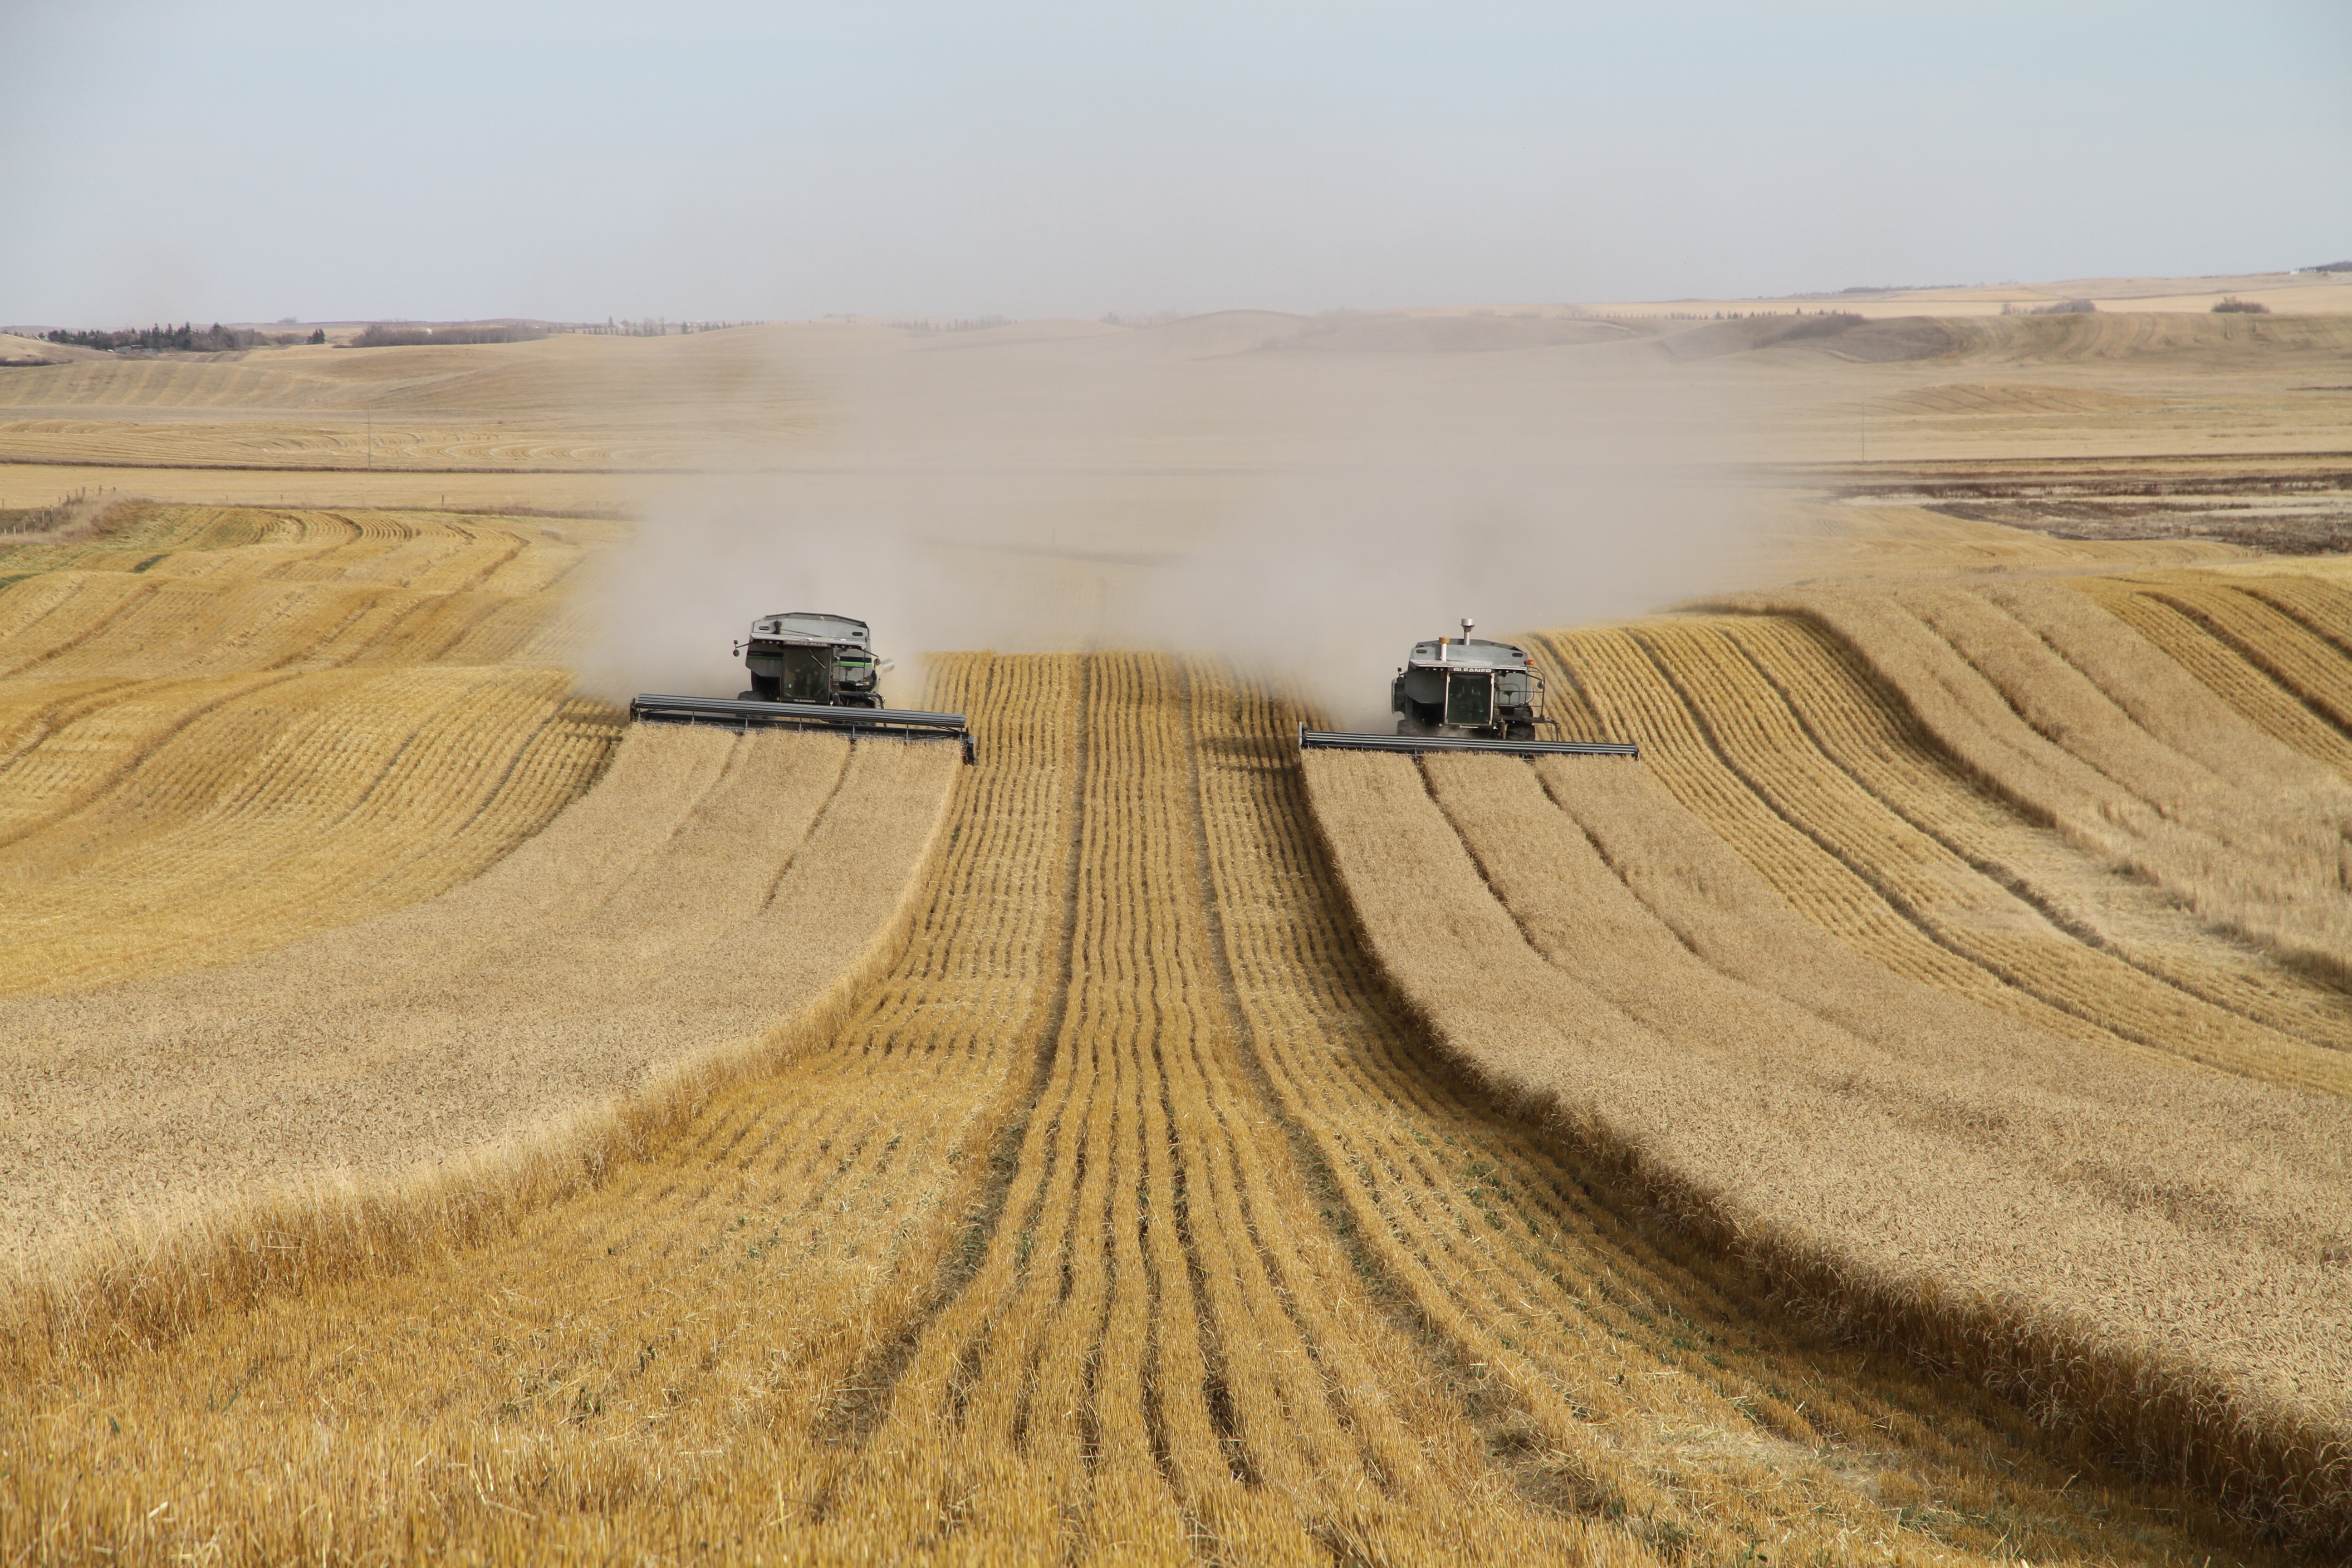 This shows two old Gleaners running on CTF tram lines, one with RTK guidance and one with nothing. 